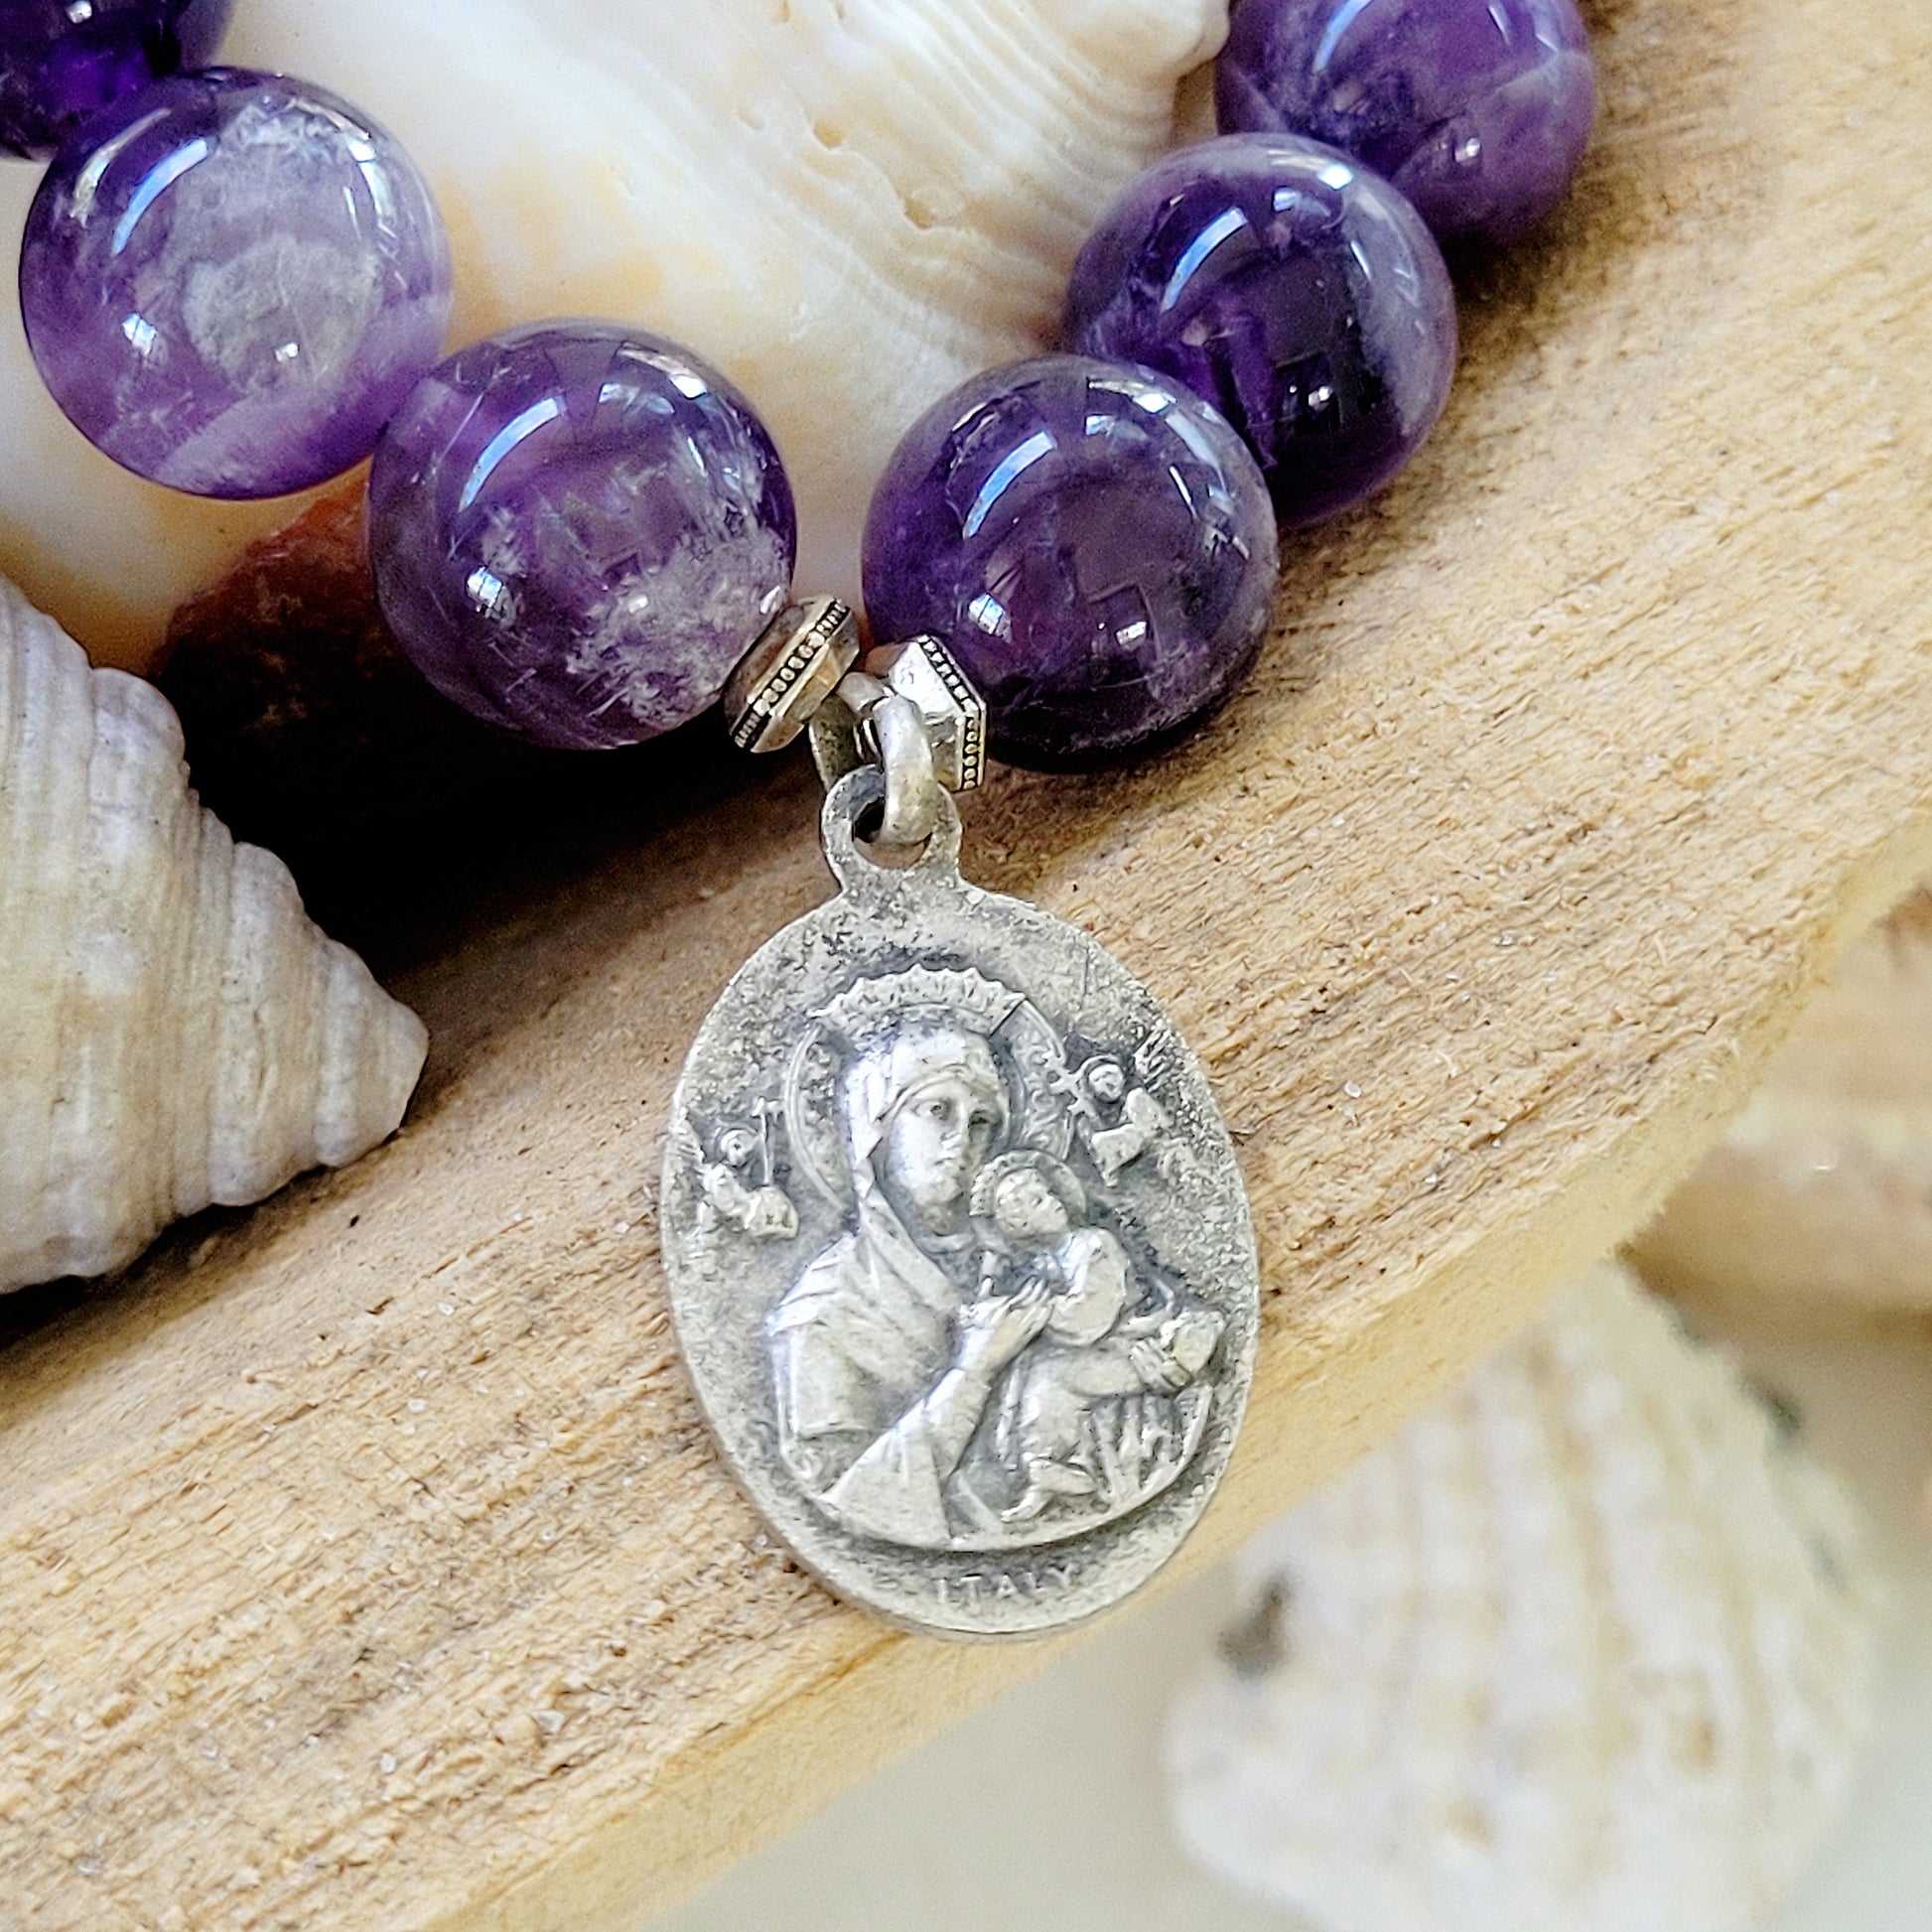 Amethyst 12mm Beaded Bracelet w/ Vintage Medal of St. Gerard Majella / Our Lady of Perpetual Help - Afterlife Jewelry Designs